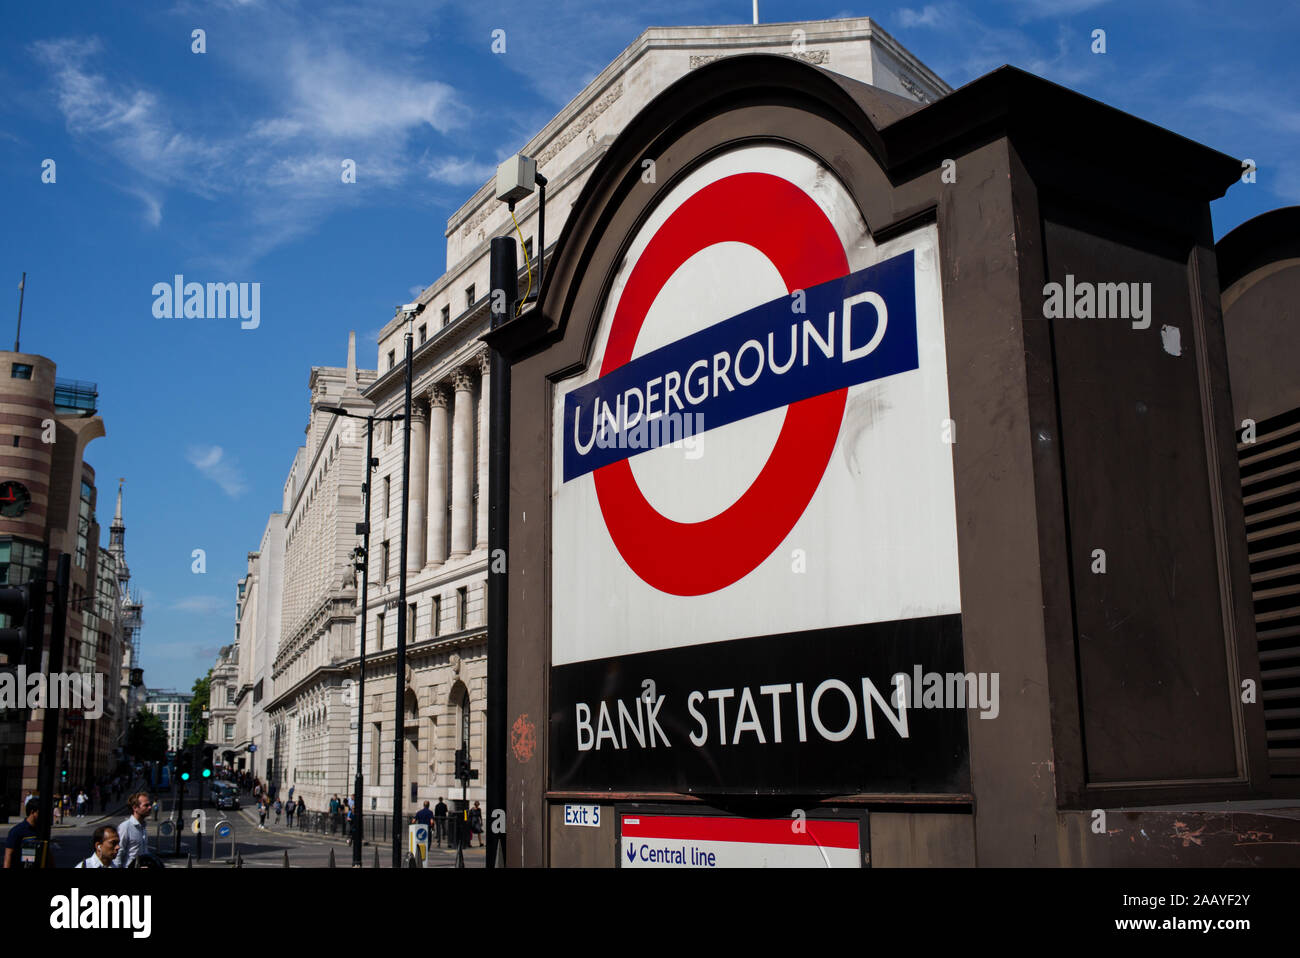 Bank Station Underground sign against buildings and blue sky Stock Photo